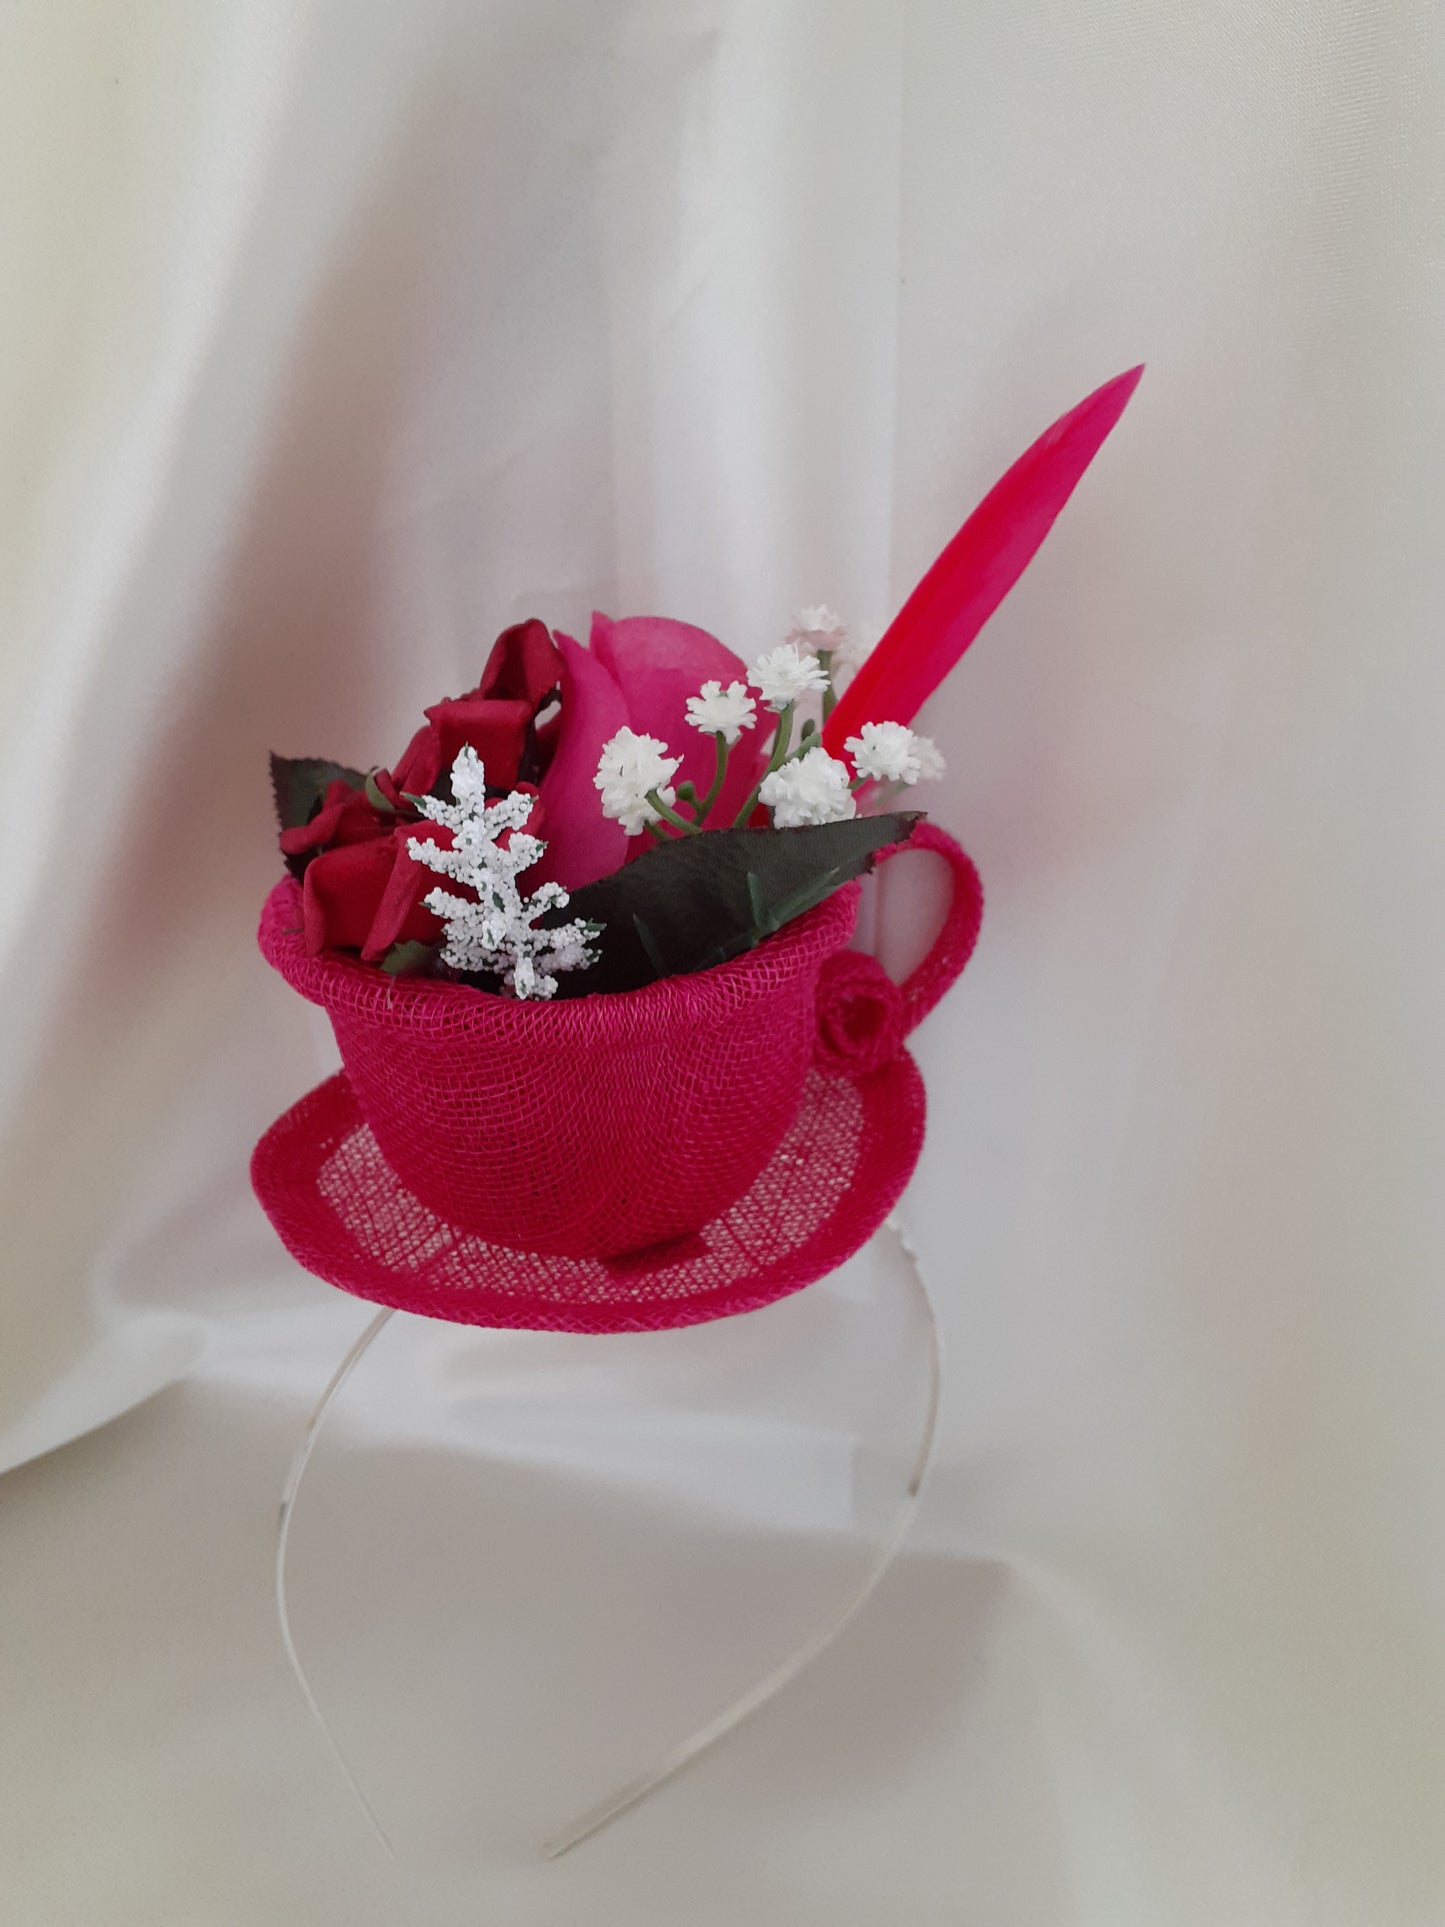 Pink and red rose cup and saucer headpiece